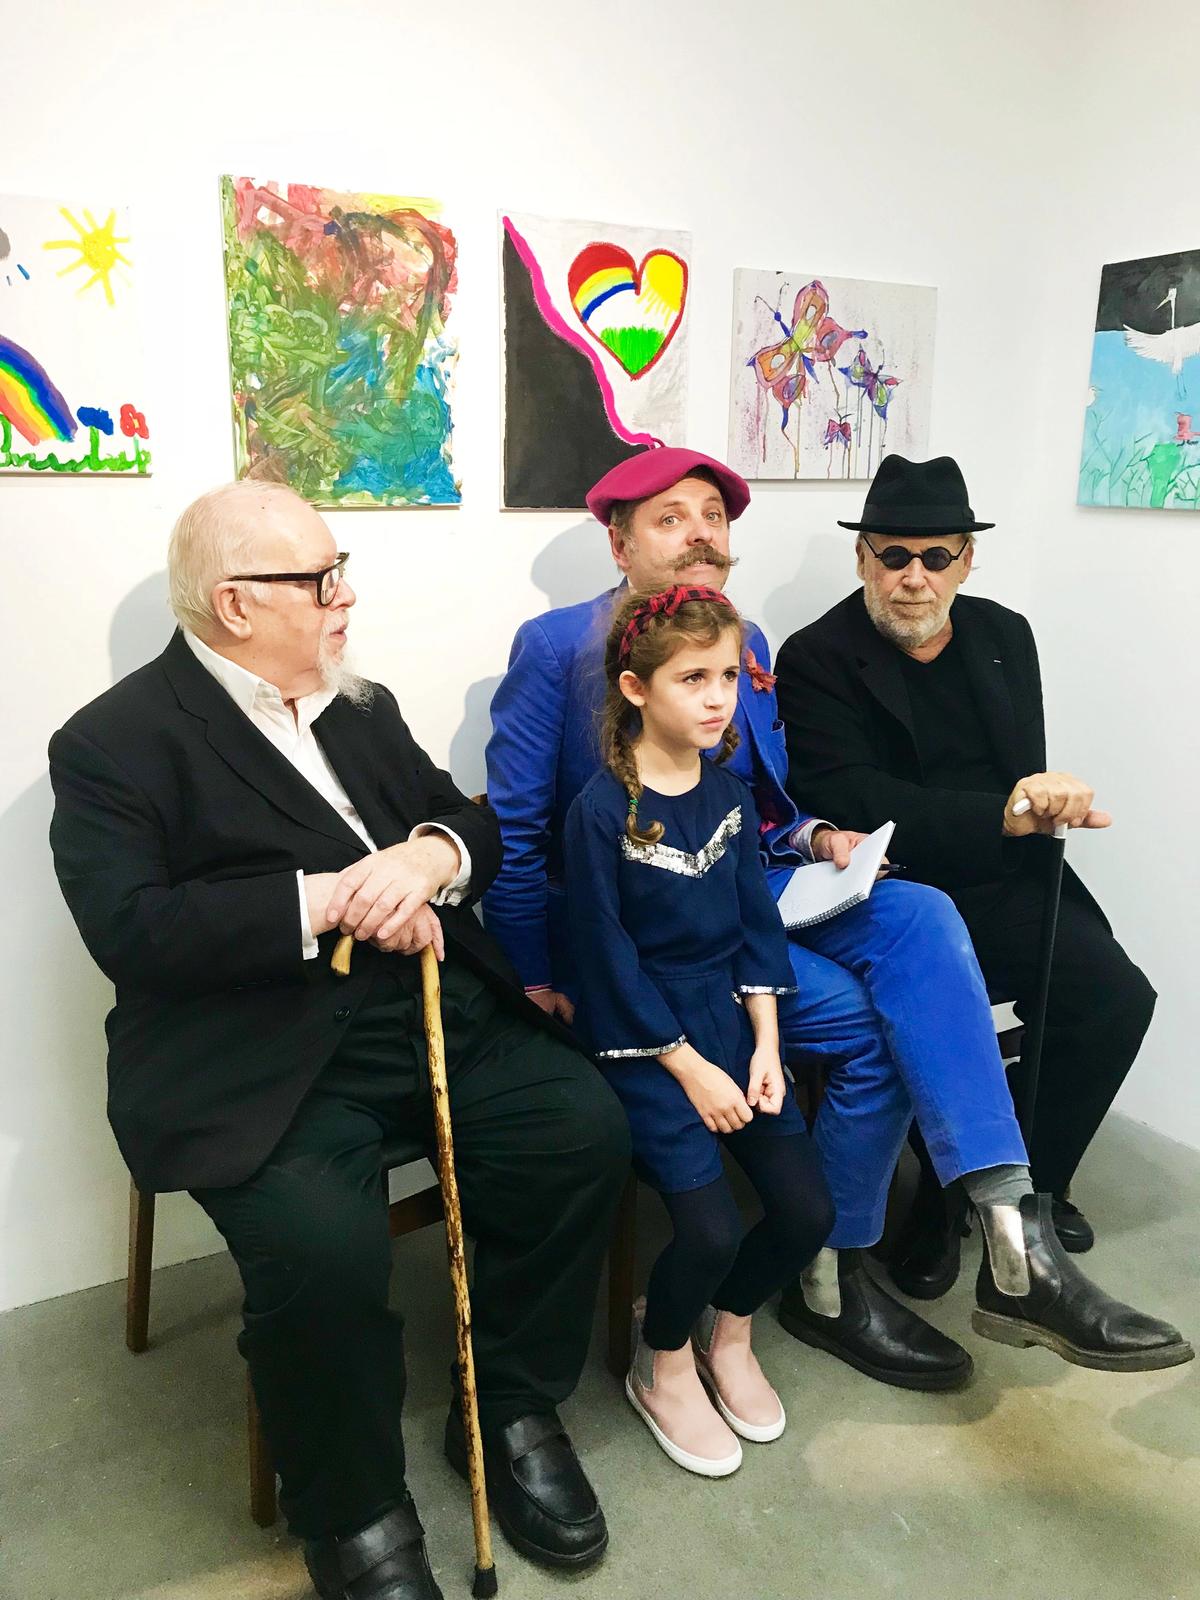 Peter Blake, Joseph Kosuth and Gavin Turk with Alison Jacques’ altruistic seven-year-old daughter © Louisa Buck